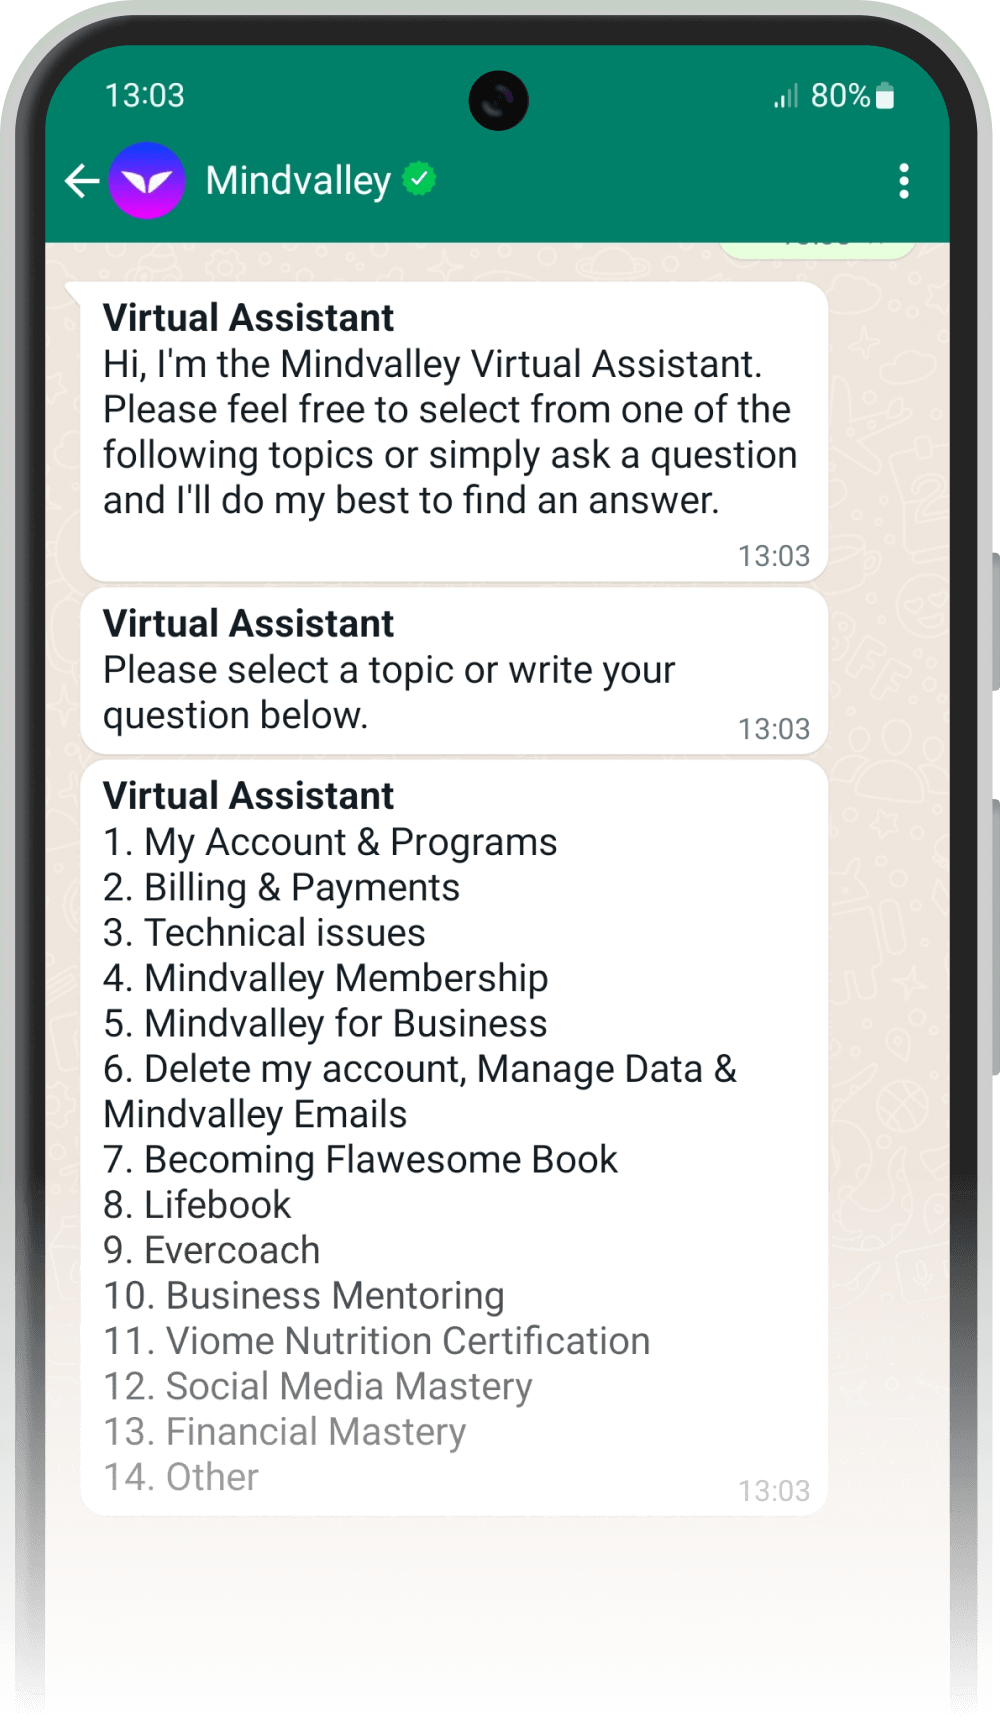 WhatsApp message, showcasing the use of AI and digital technologies to provide guidance on choosing classes